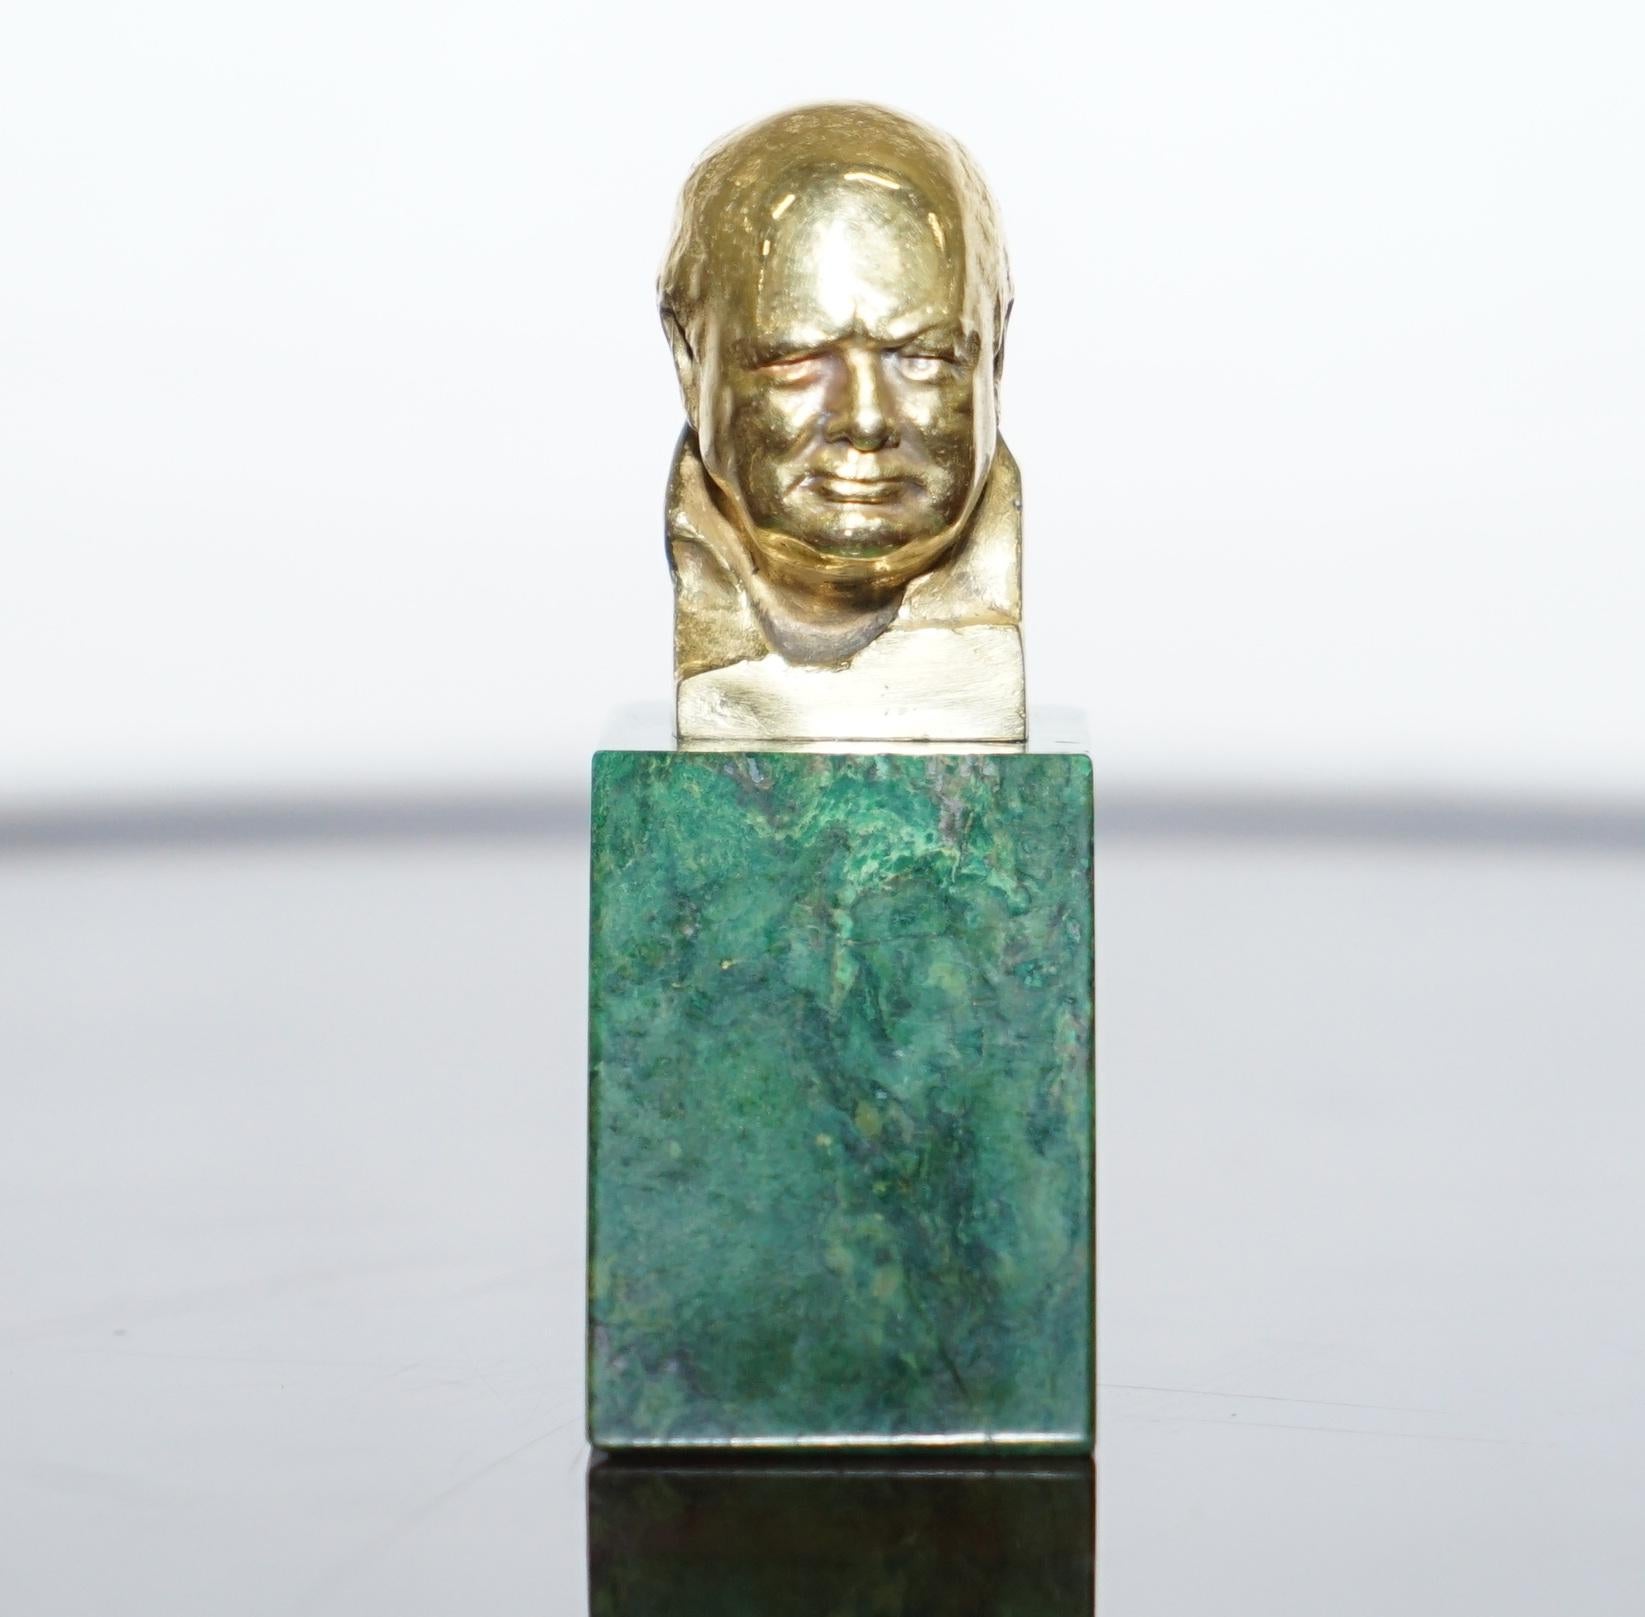 Wimbledon-Furniture

Wimbledon-Furniture is delighted to offer for sale this very rare and highly collectable Oscar Nemon 18ct gold bust sitting on a Malachite base of Winston Churchill retailed through Asprey & Co London

What a beautiful and